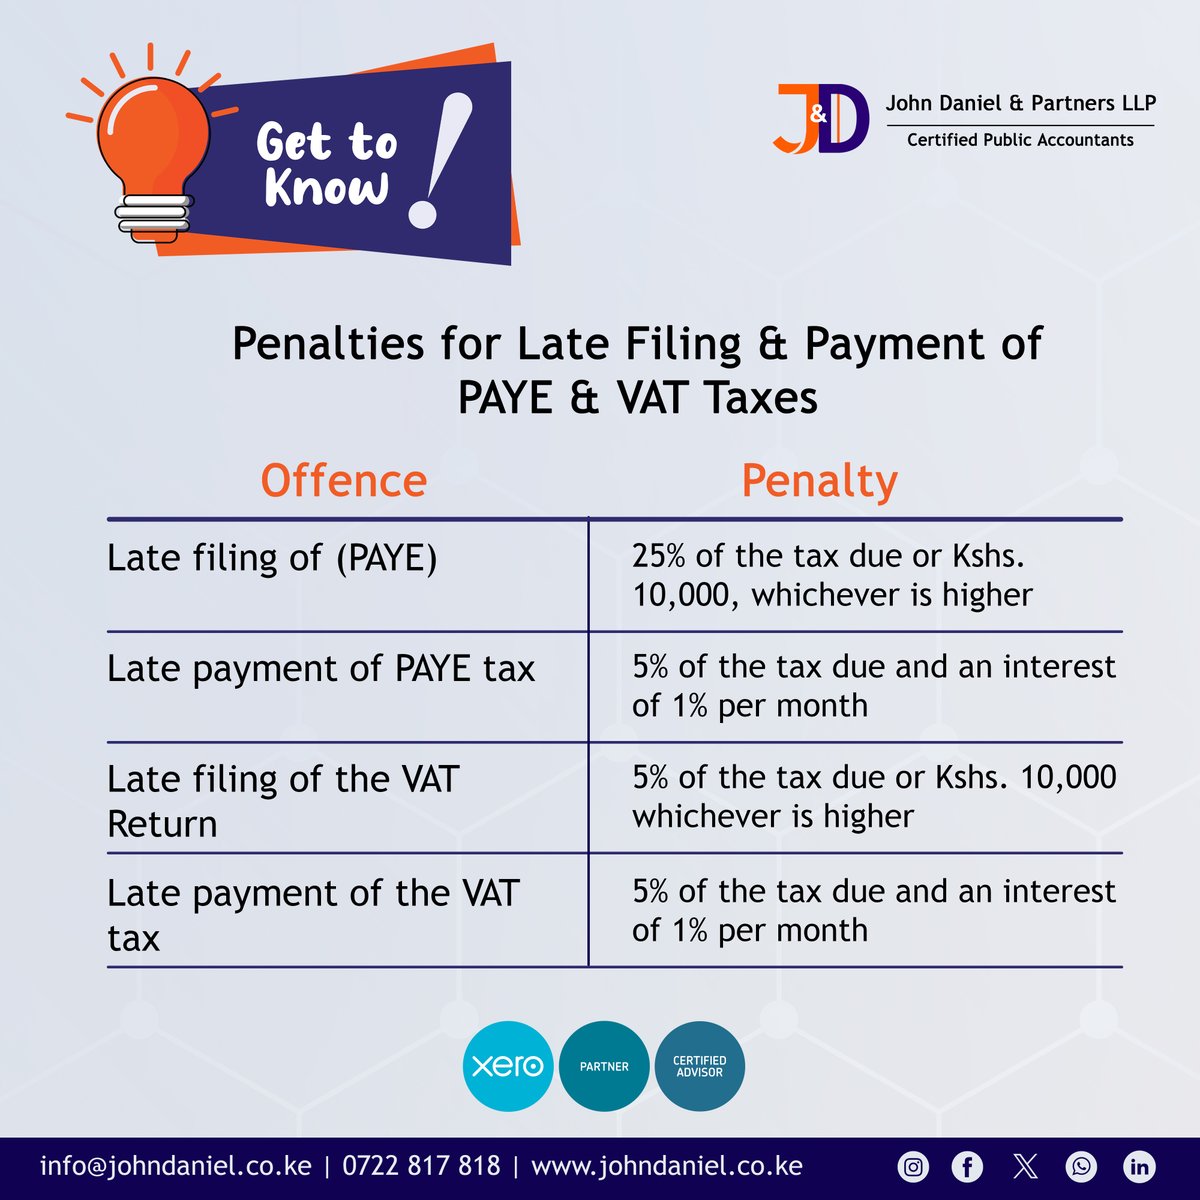 Late filing and payment of taxes attract penalties, whether for an individual or a business entity. Have a look at penalties for PAYE & VAT offenses.

#Tax #FilingTaxes #TaxObligations #WednesdayMotivation